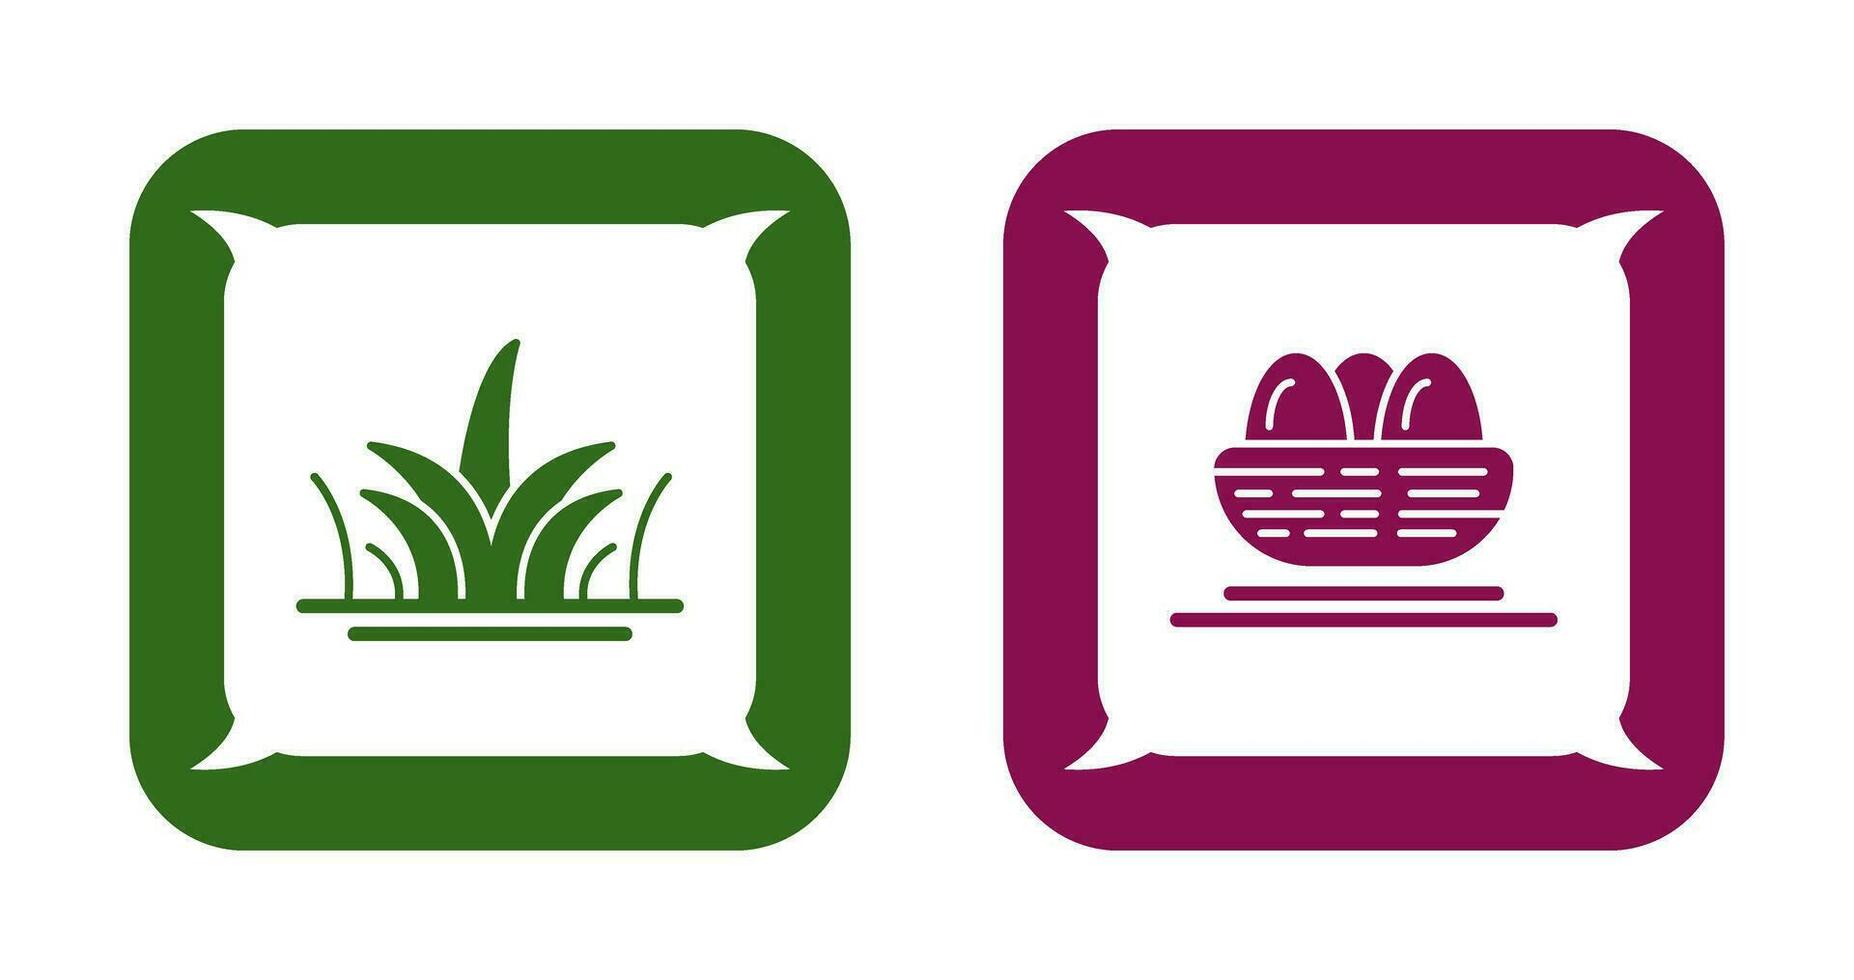 Grass and Eggs Icon vector